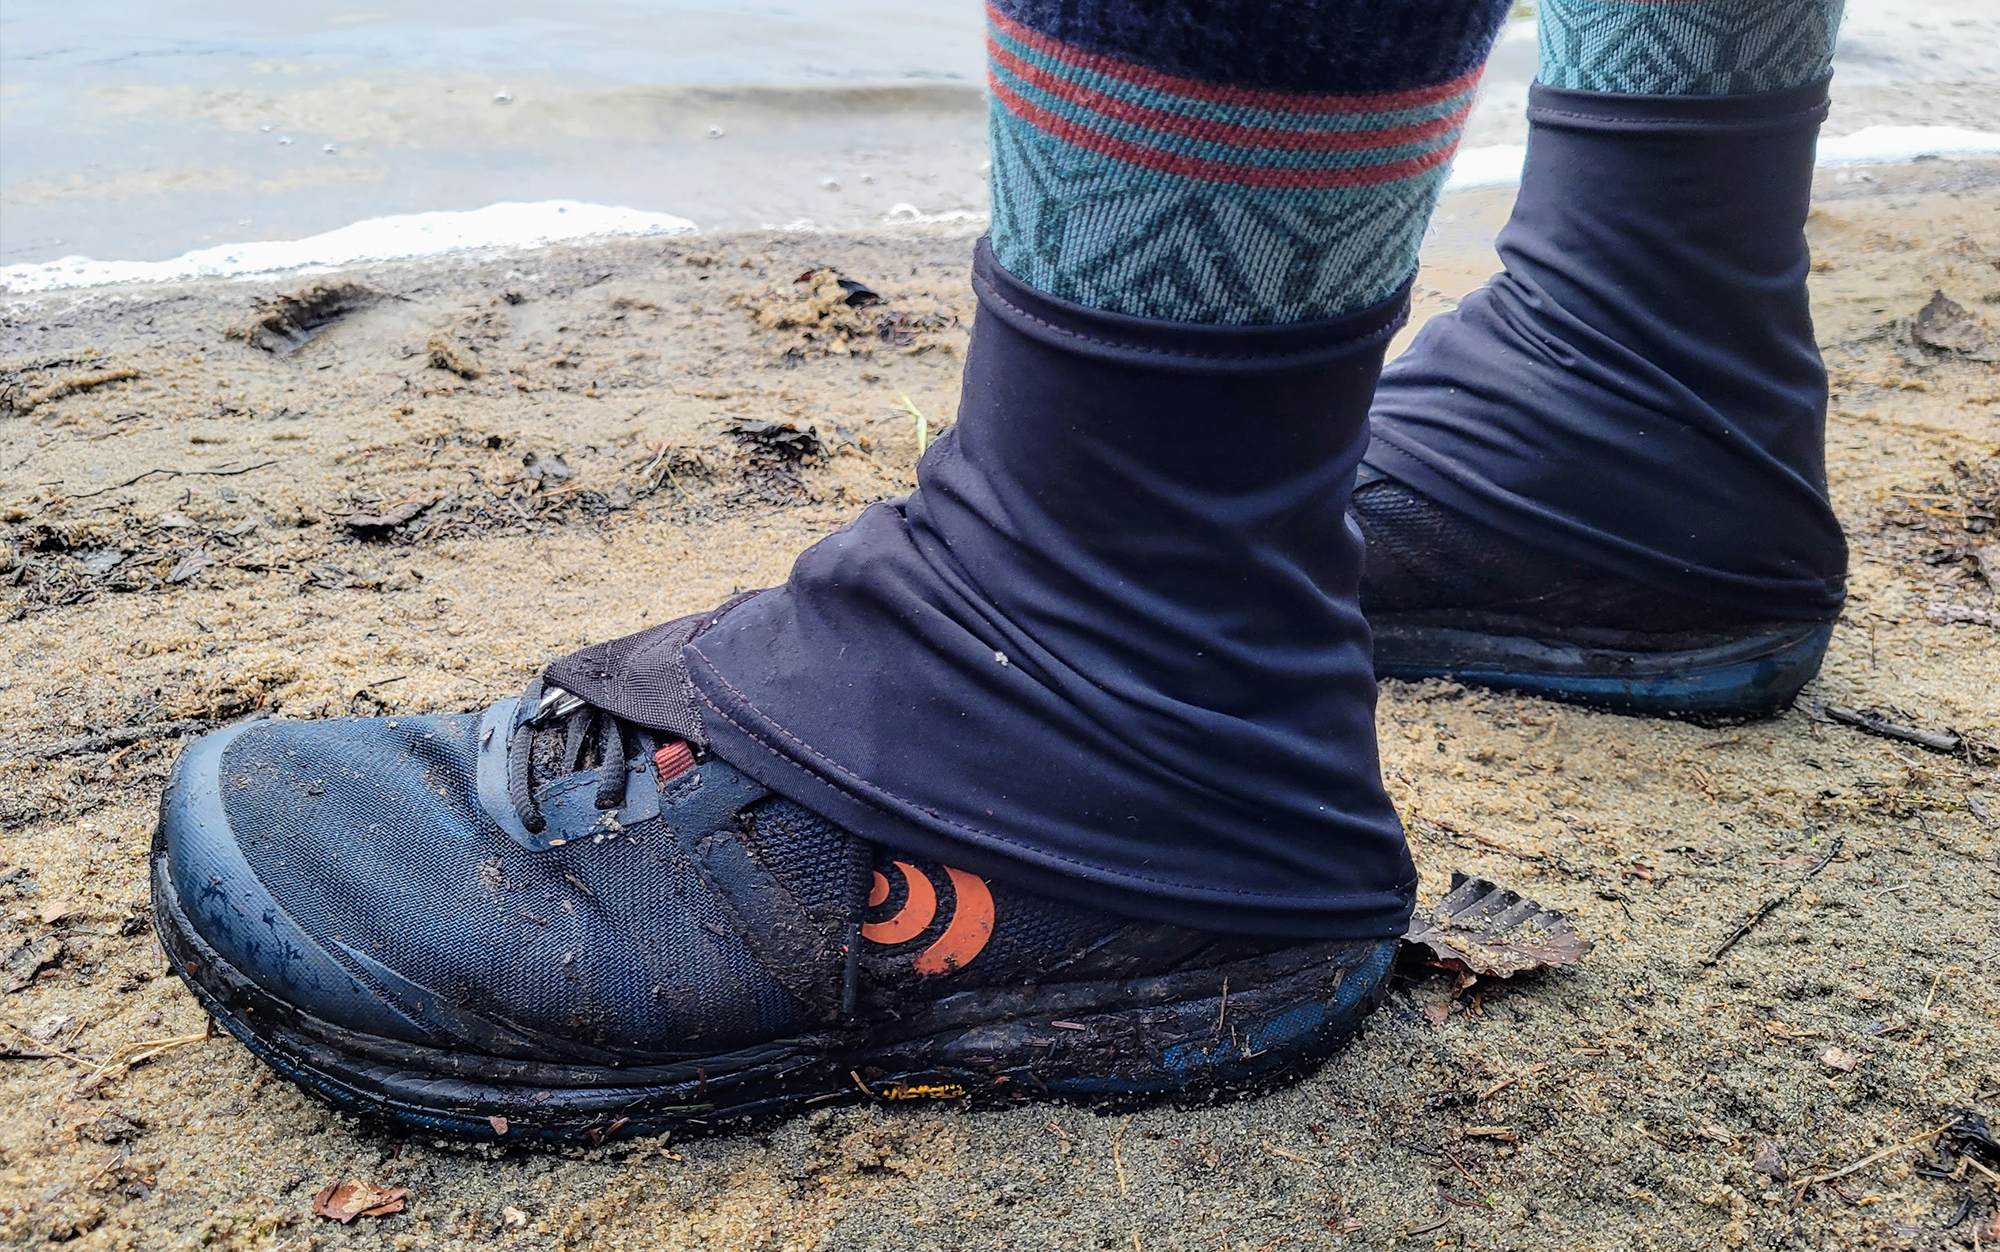 We tested Dirty Girl Gaiters.